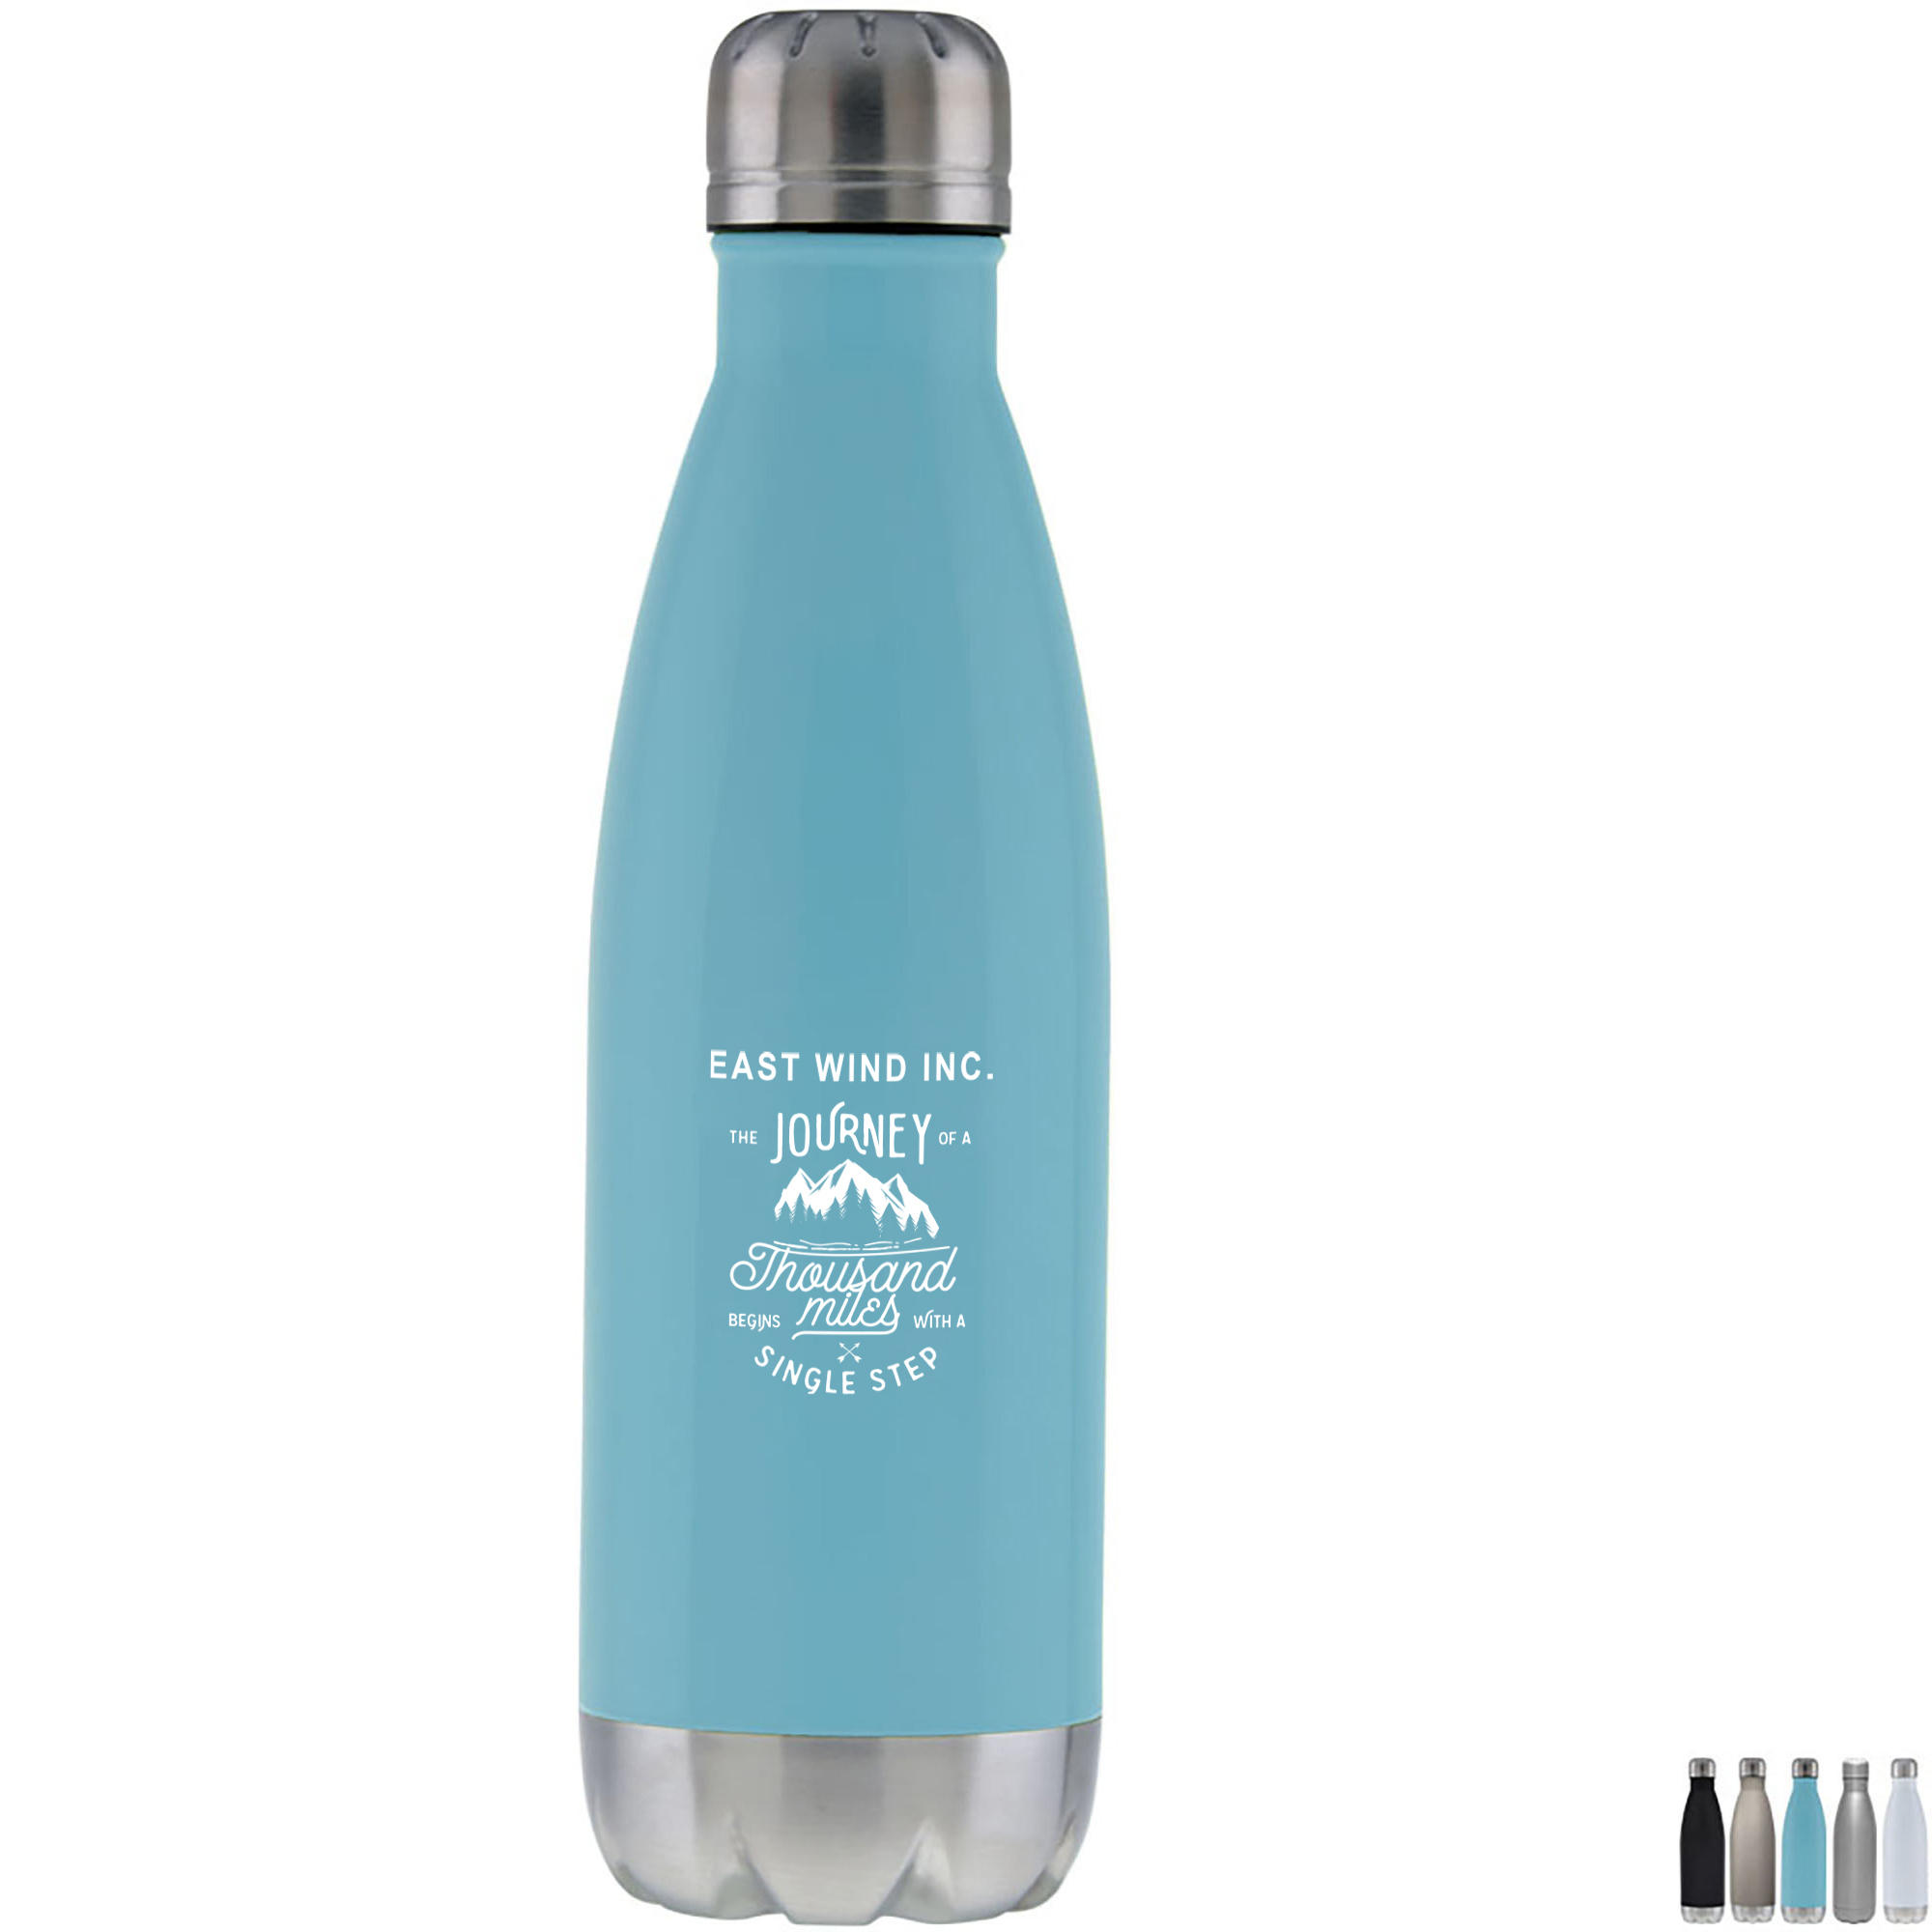 Promotional Coleman 24 oz. Connector Stainless Steel Bottle - Custom  Promotional Products